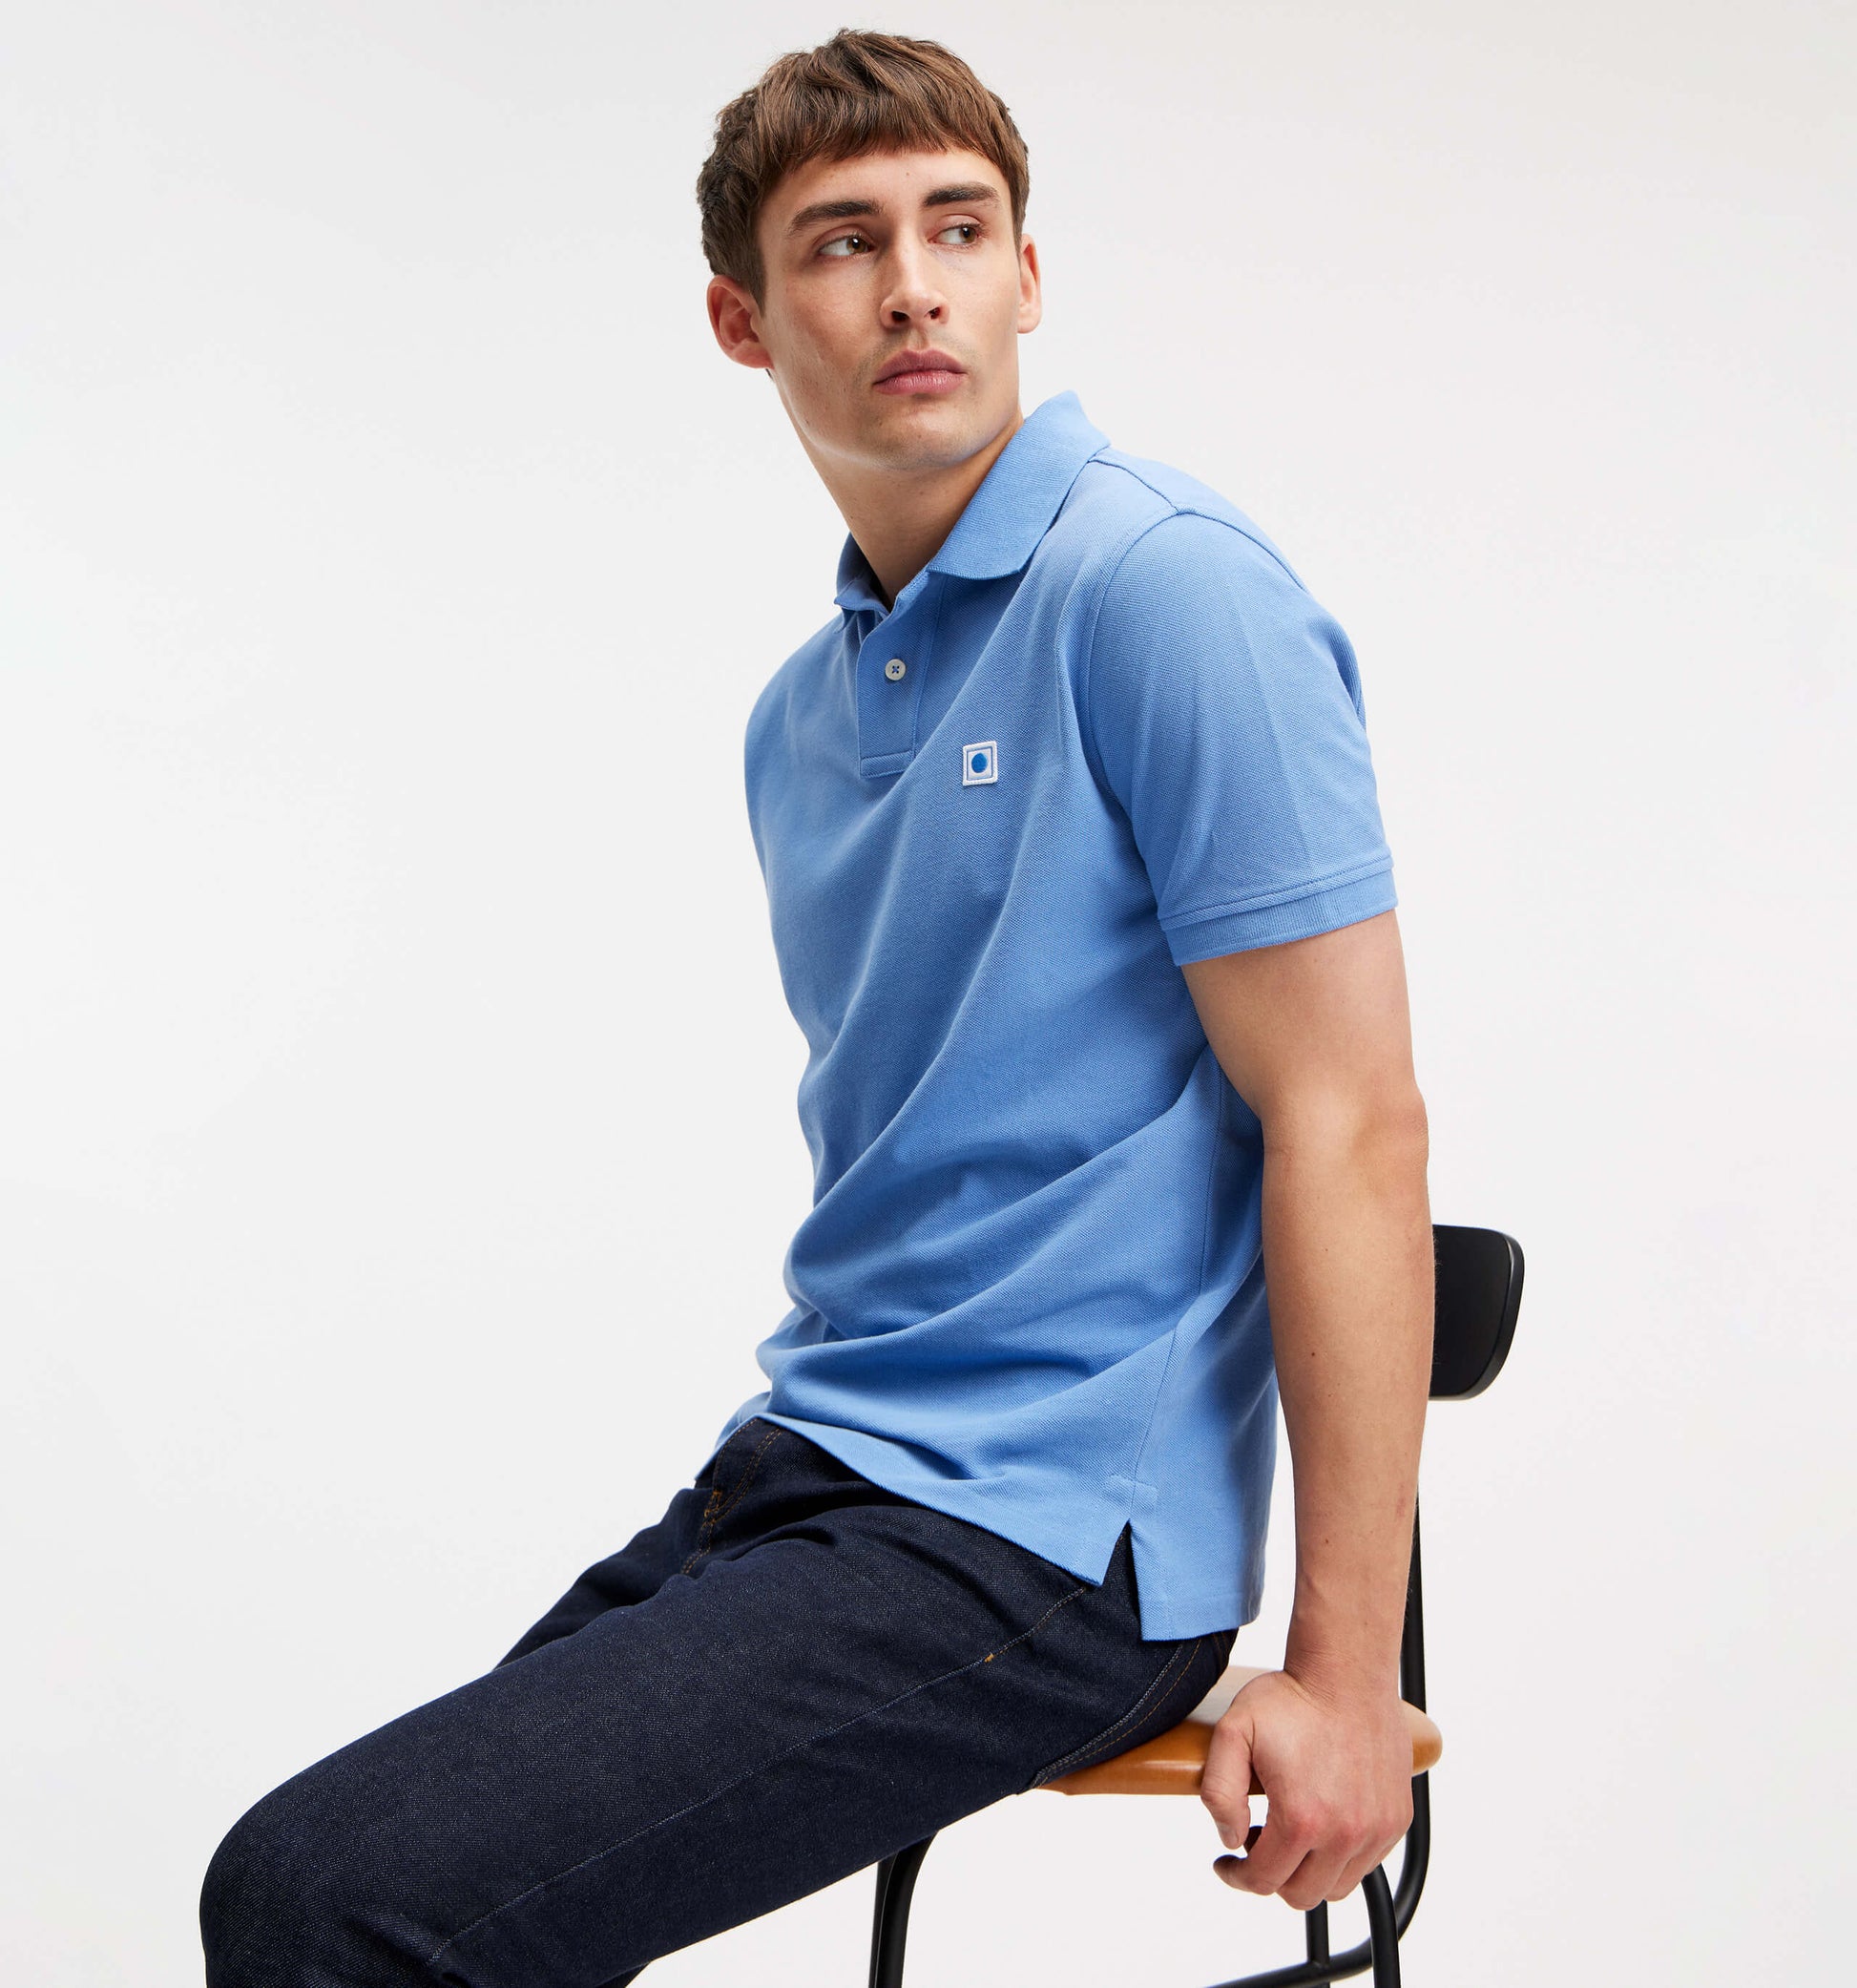 The Rene - Pique Polo In Blue From King Essentials